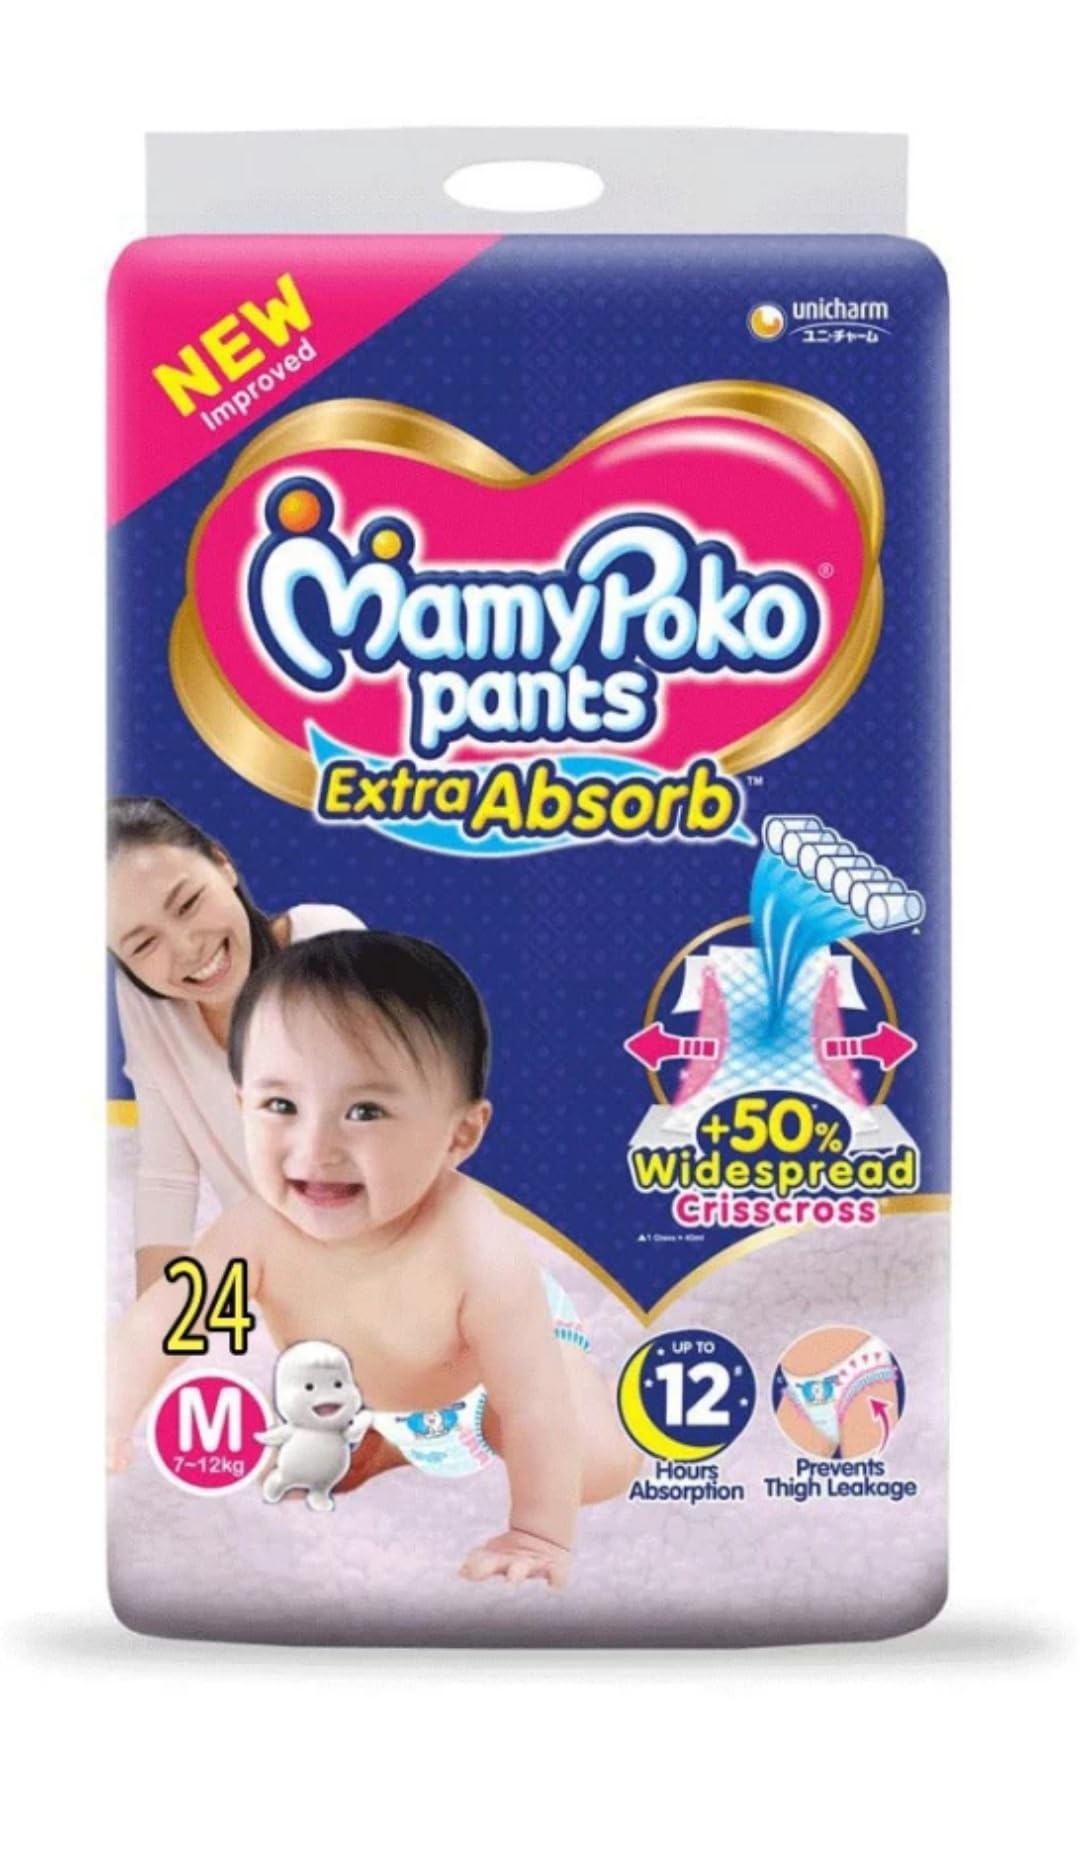 The Mamy Poko extra absorb baby diapers